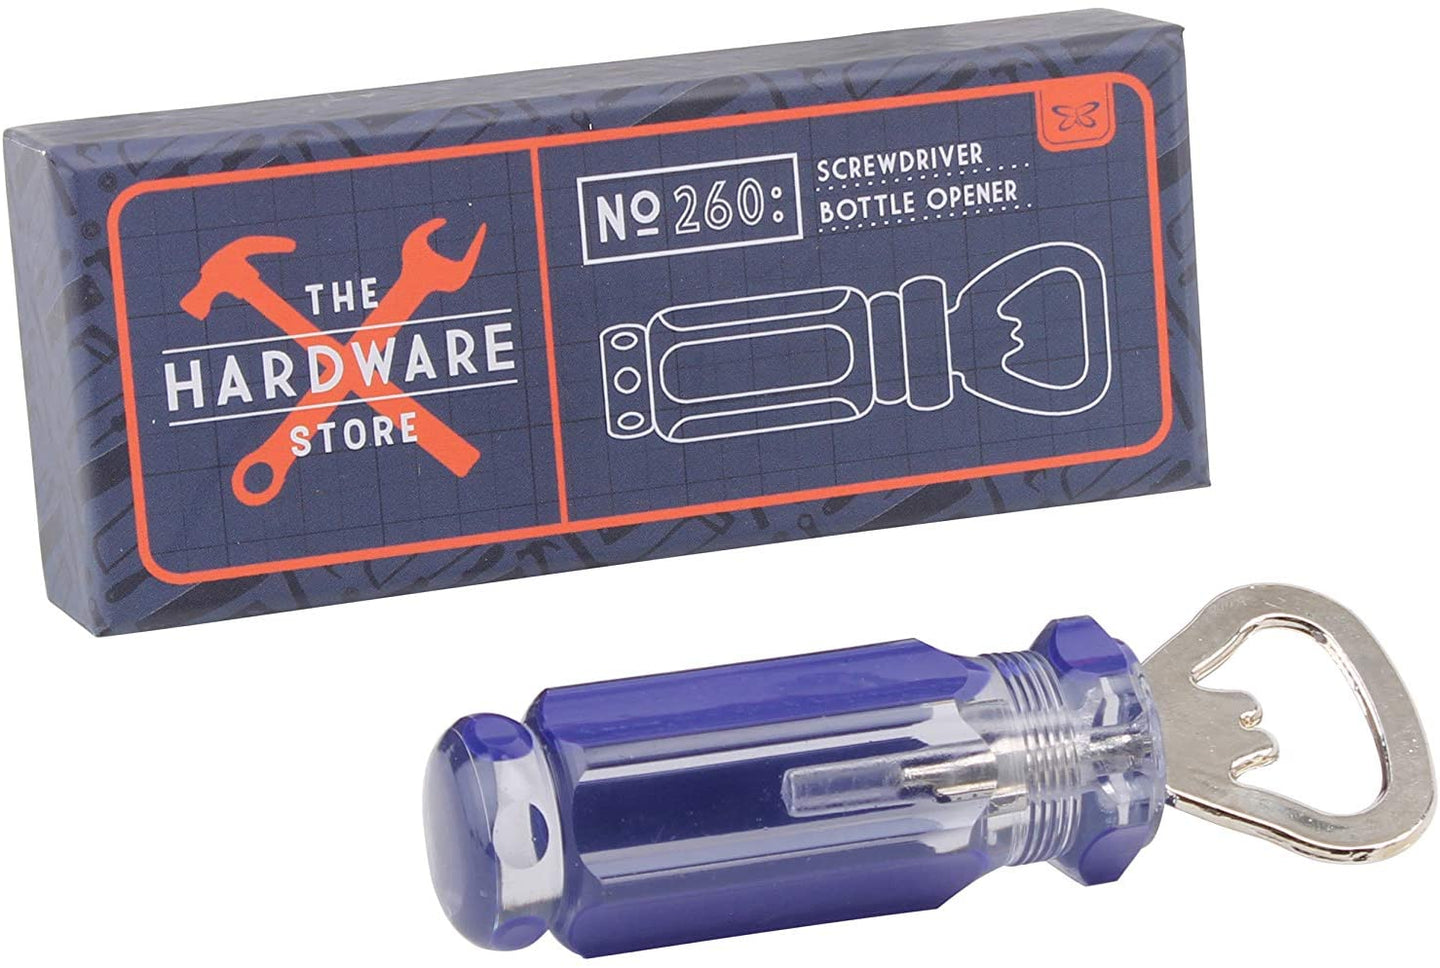 THE HARDWARE STORE SCREWDRIVER BOTTLE OPENER GIFT BOXED